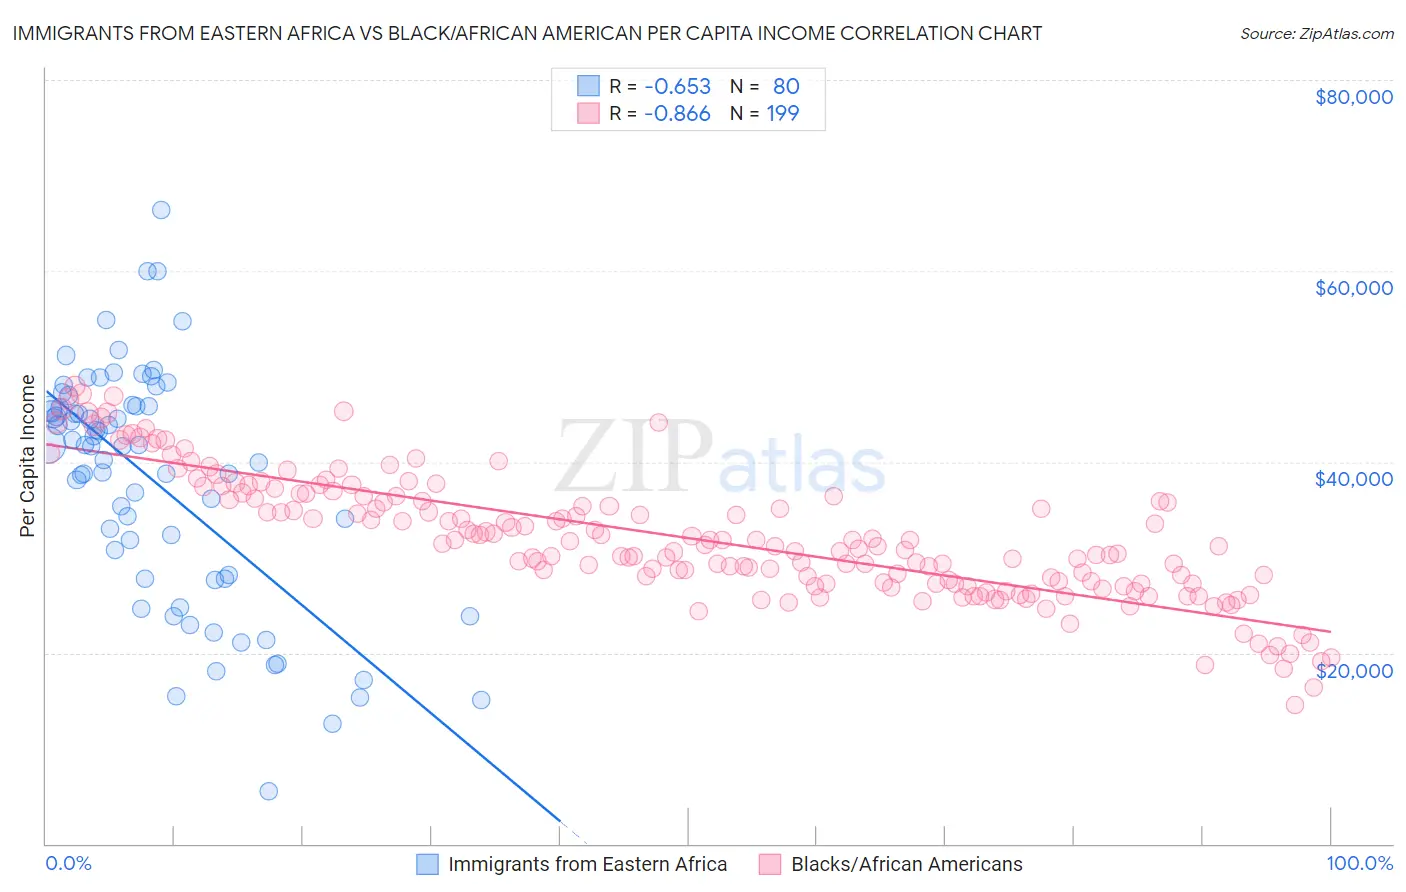 Immigrants from Eastern Africa vs Black/African American Per Capita Income